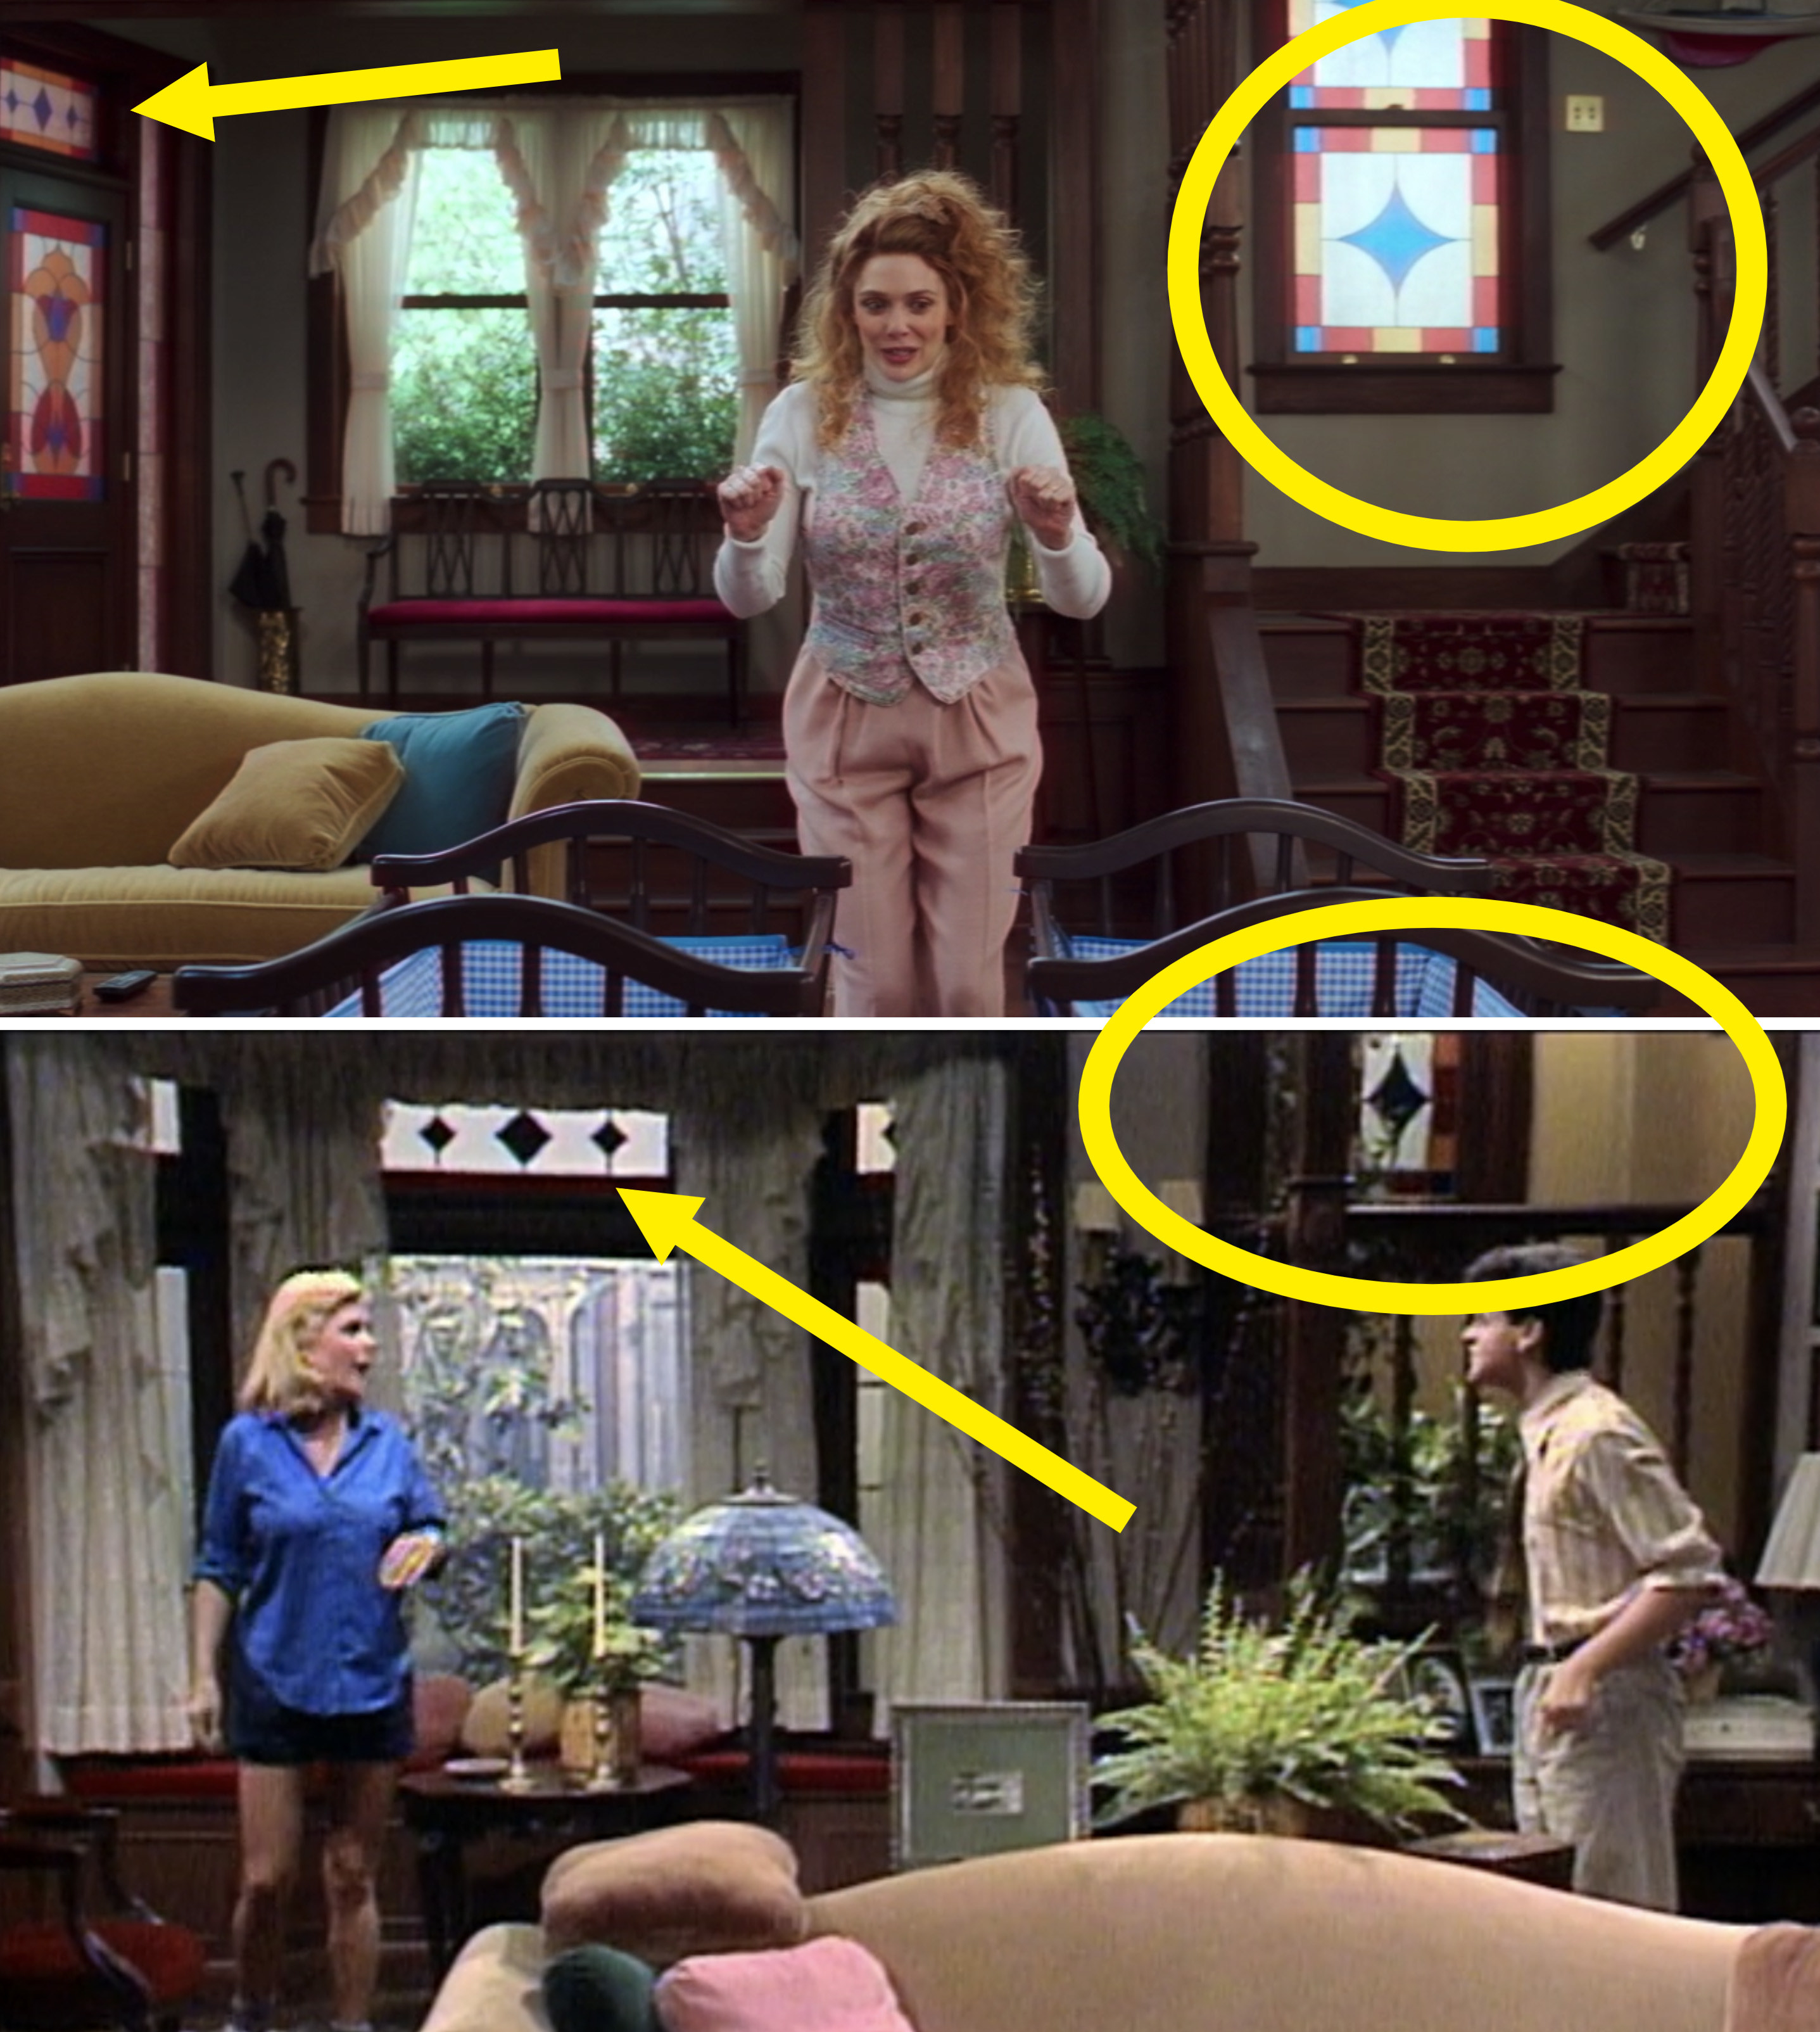 Circles and arrows pointing out the stained glass near the stairs and above the door in WandaVision vs. the stained glass near the stairs and above a window in Family Ties